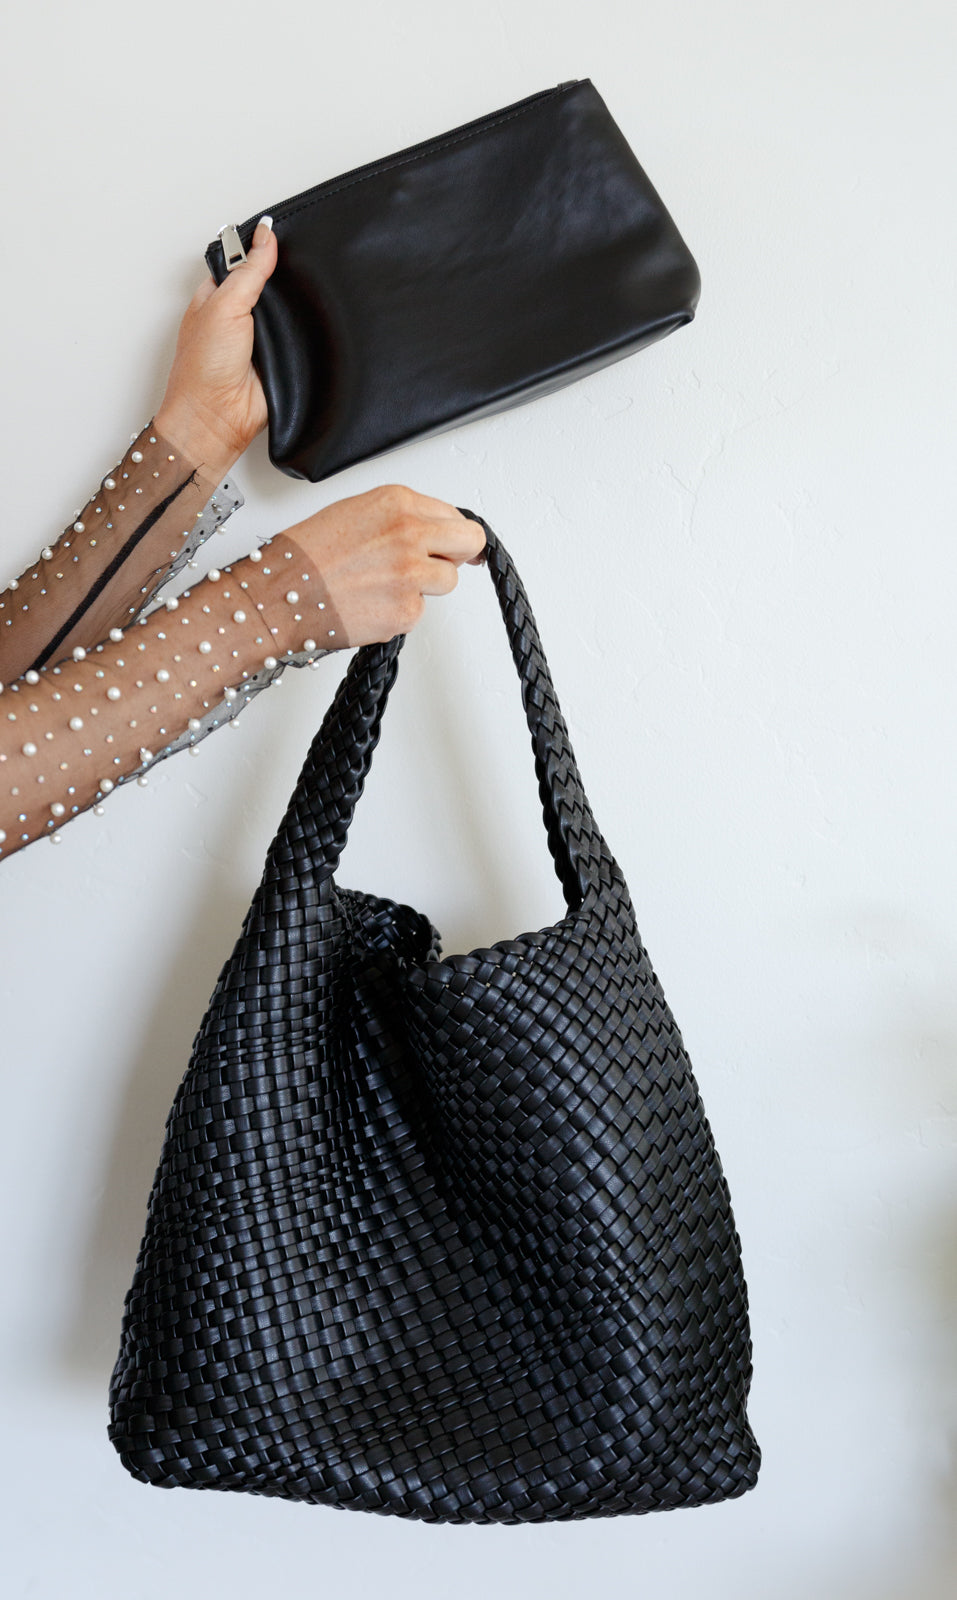 Woven and Worn Tote in Black - WEBSITE EXCLUSIVE